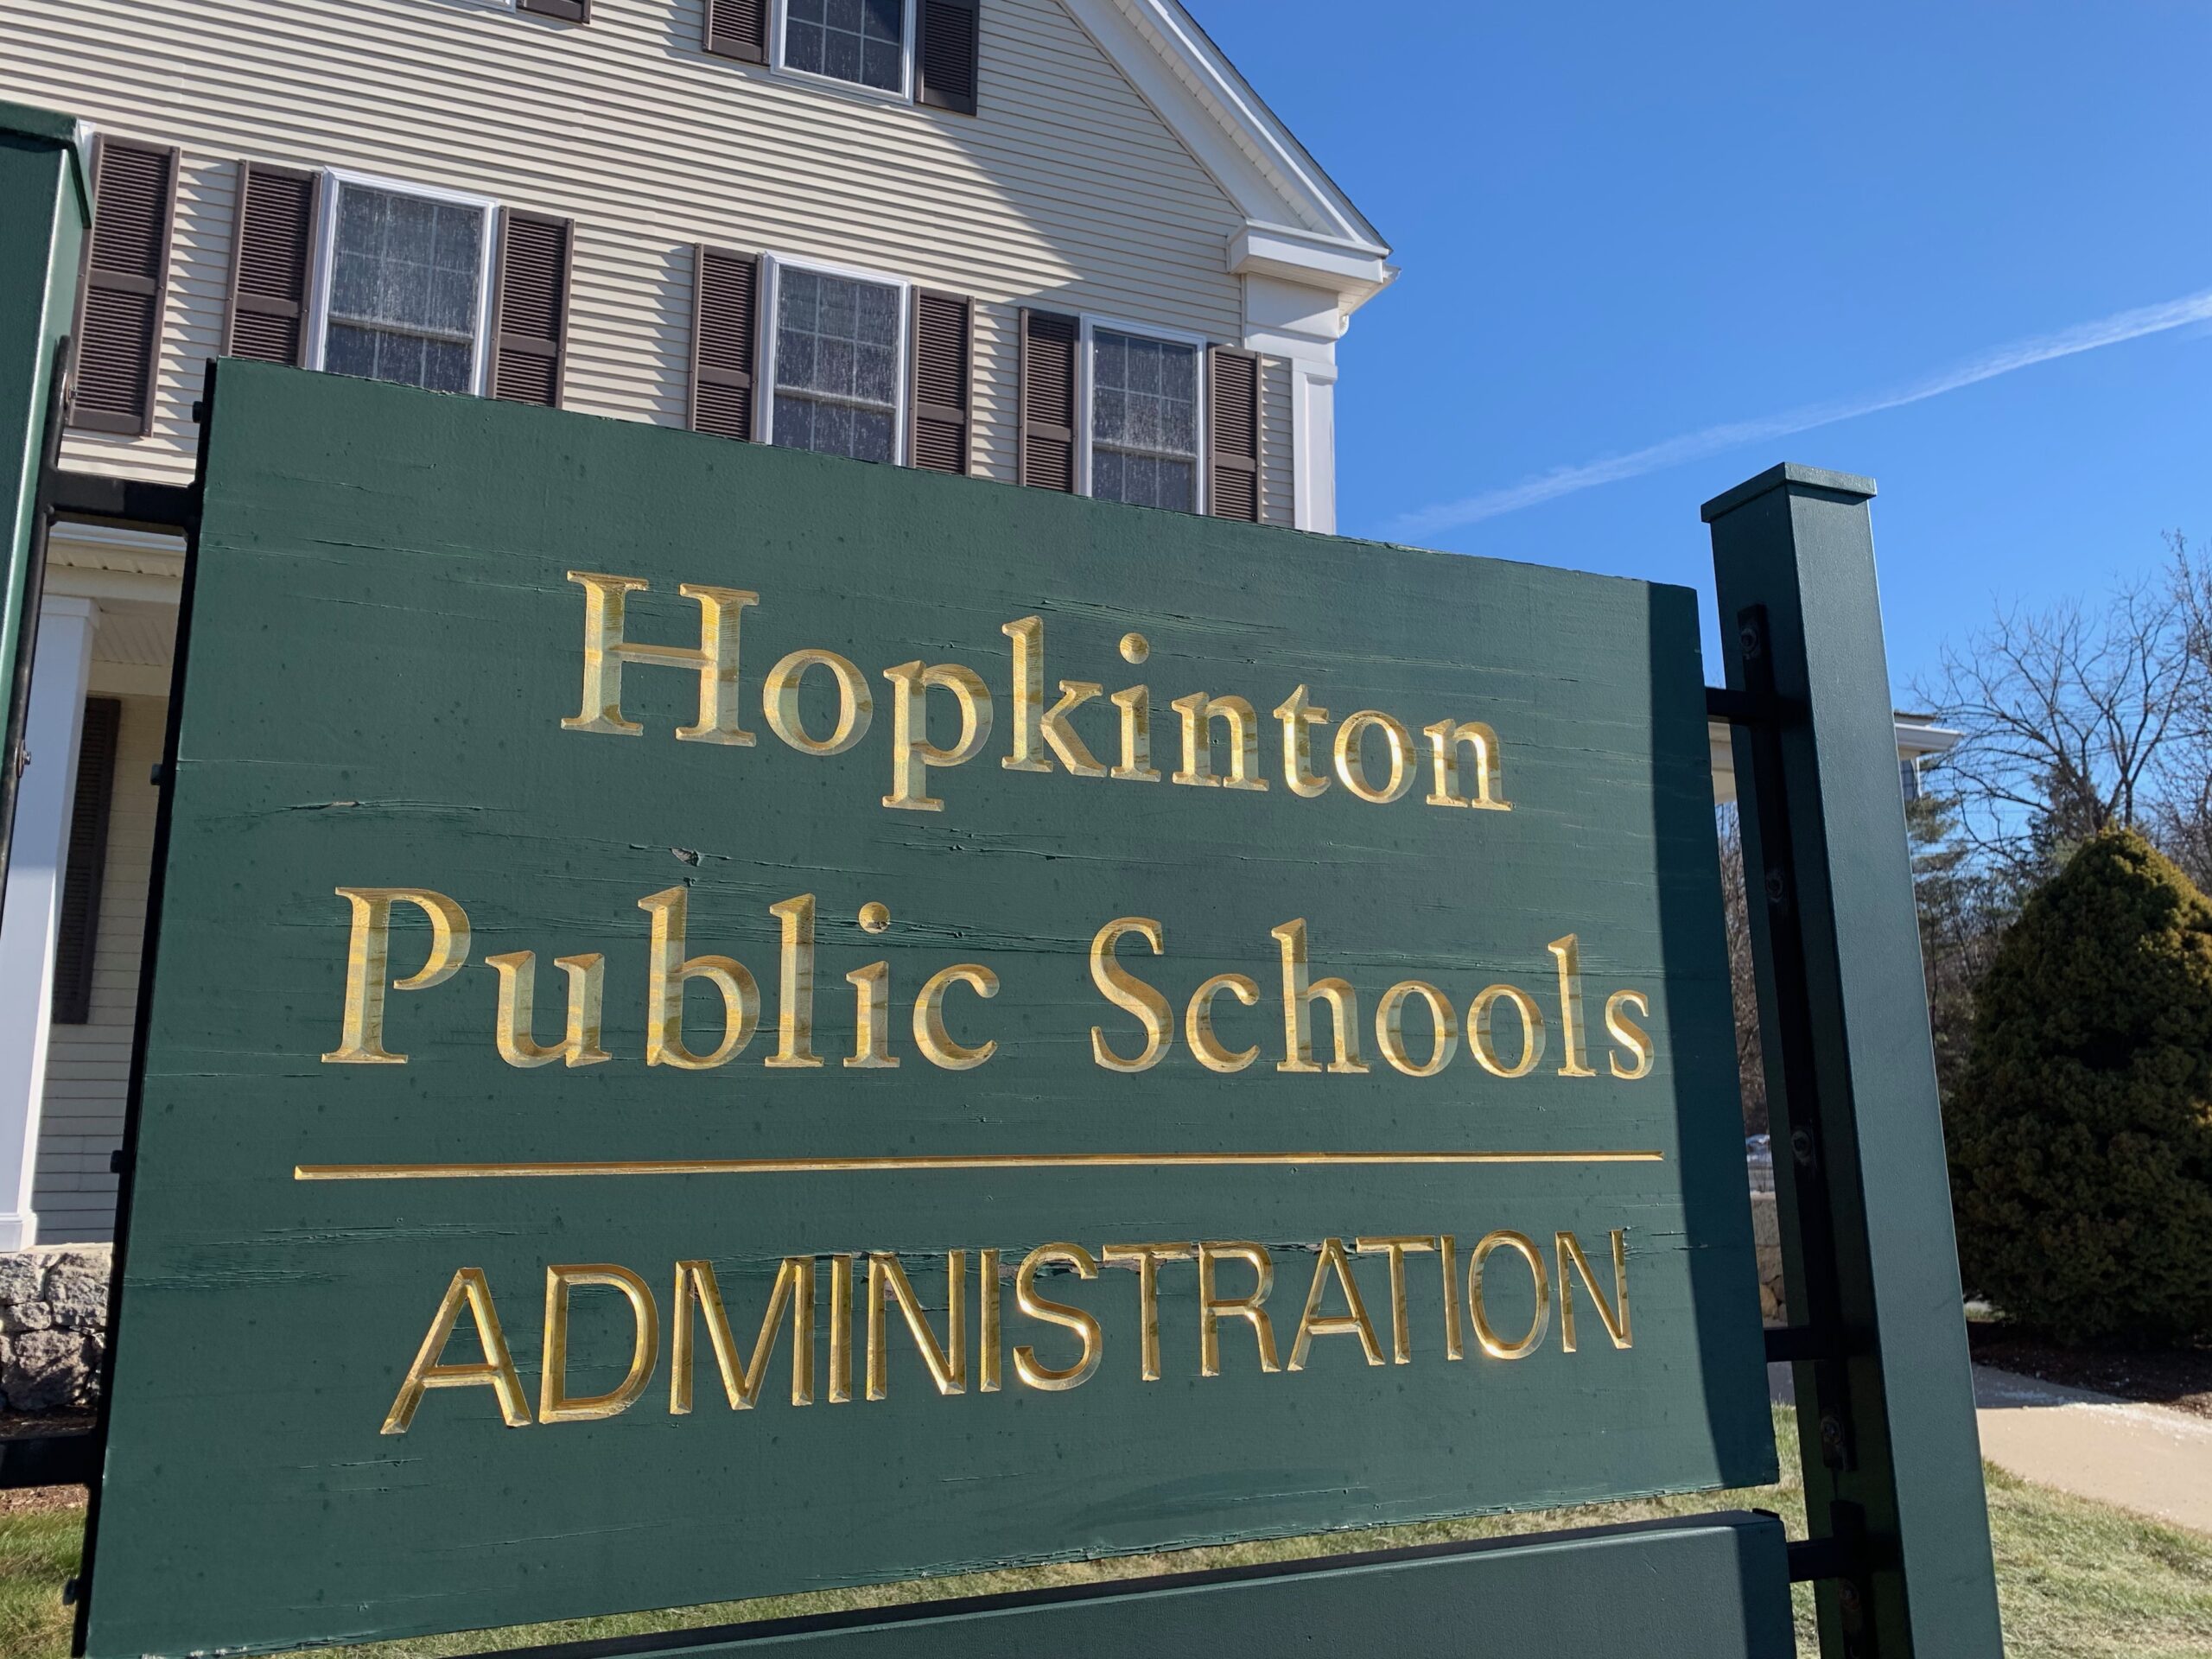 School Committee reviews expansion needs at Hopkins School